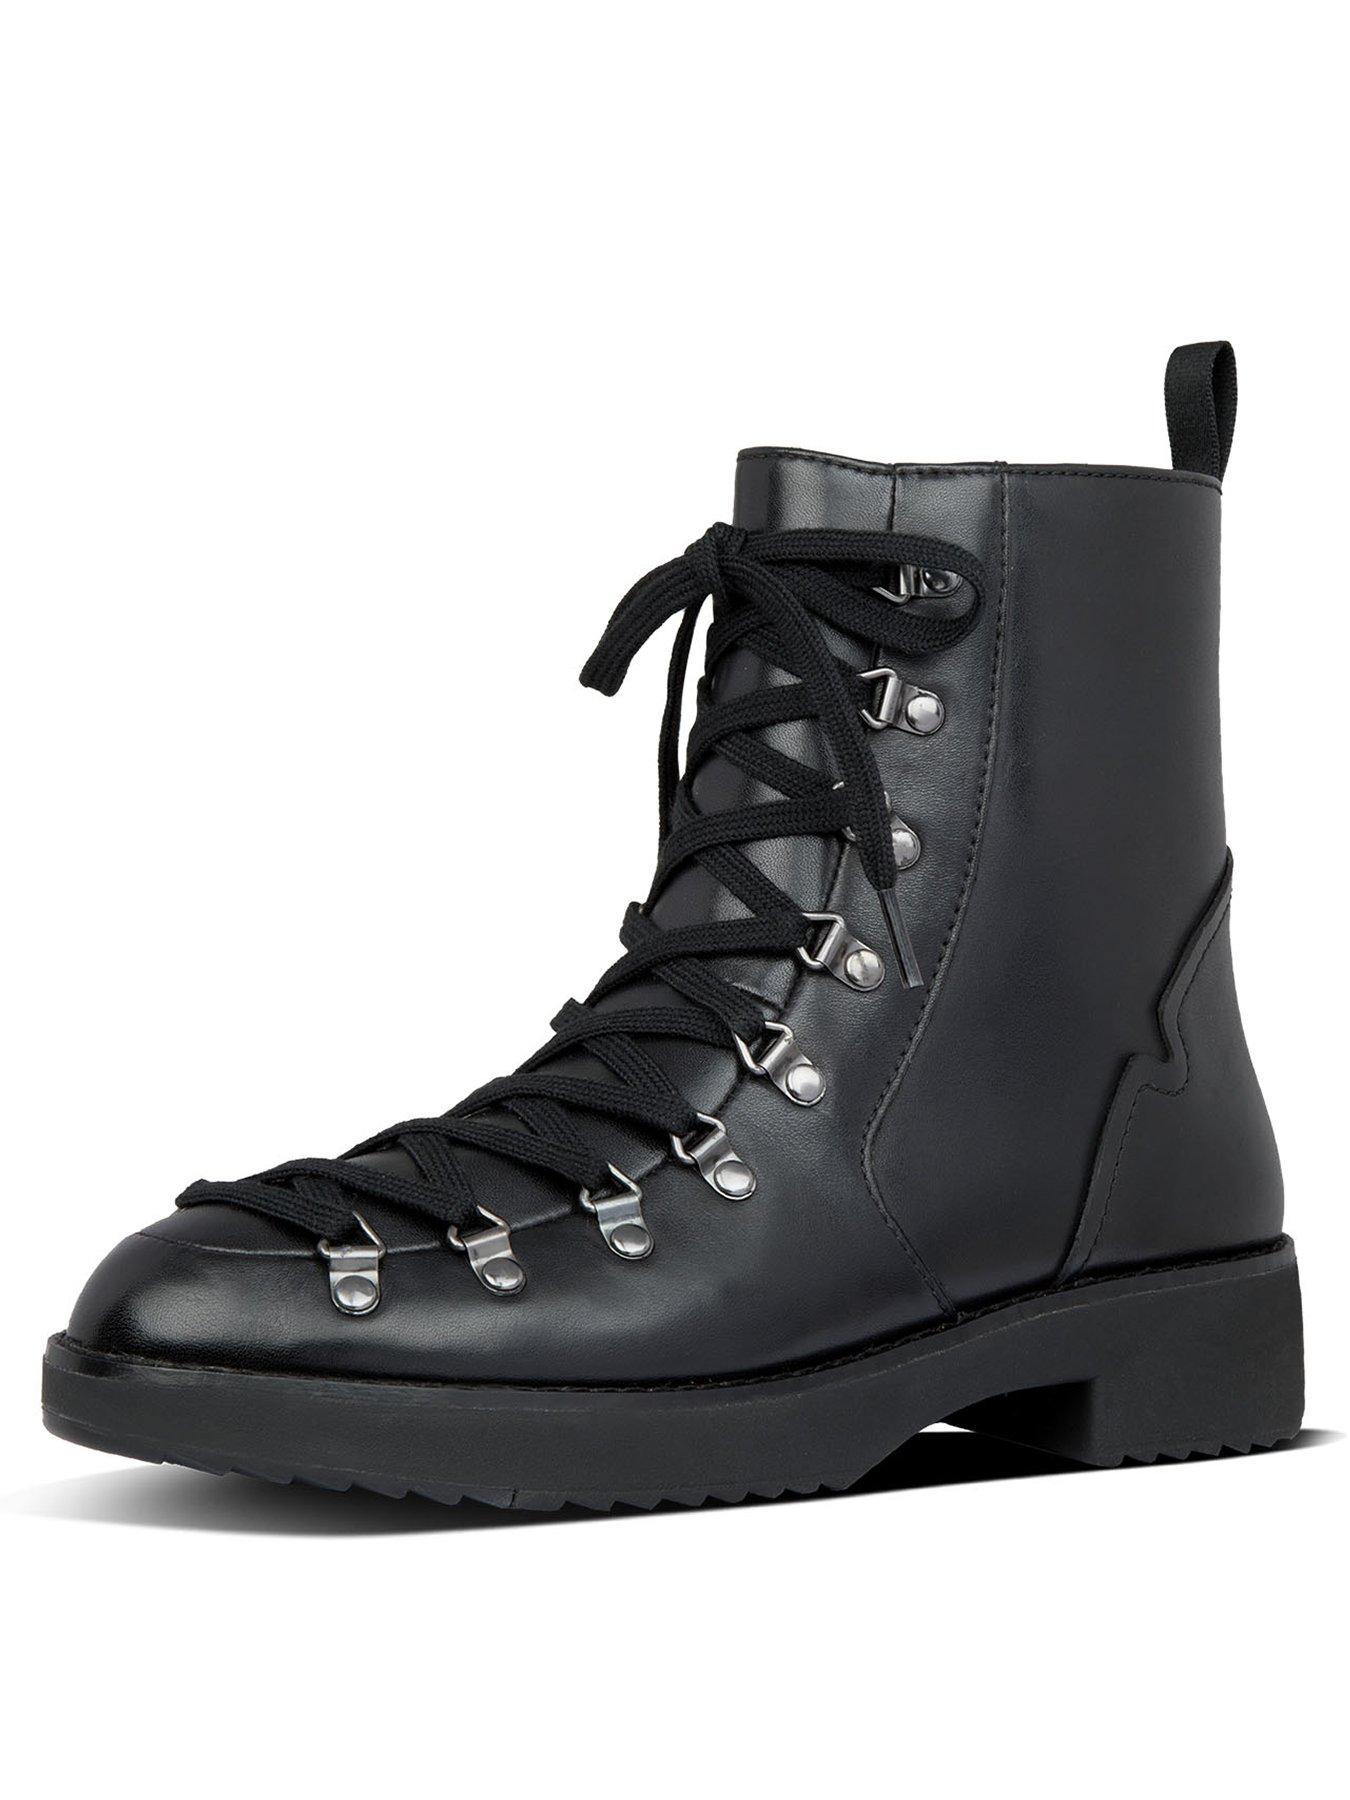 hiker ankle boots womens